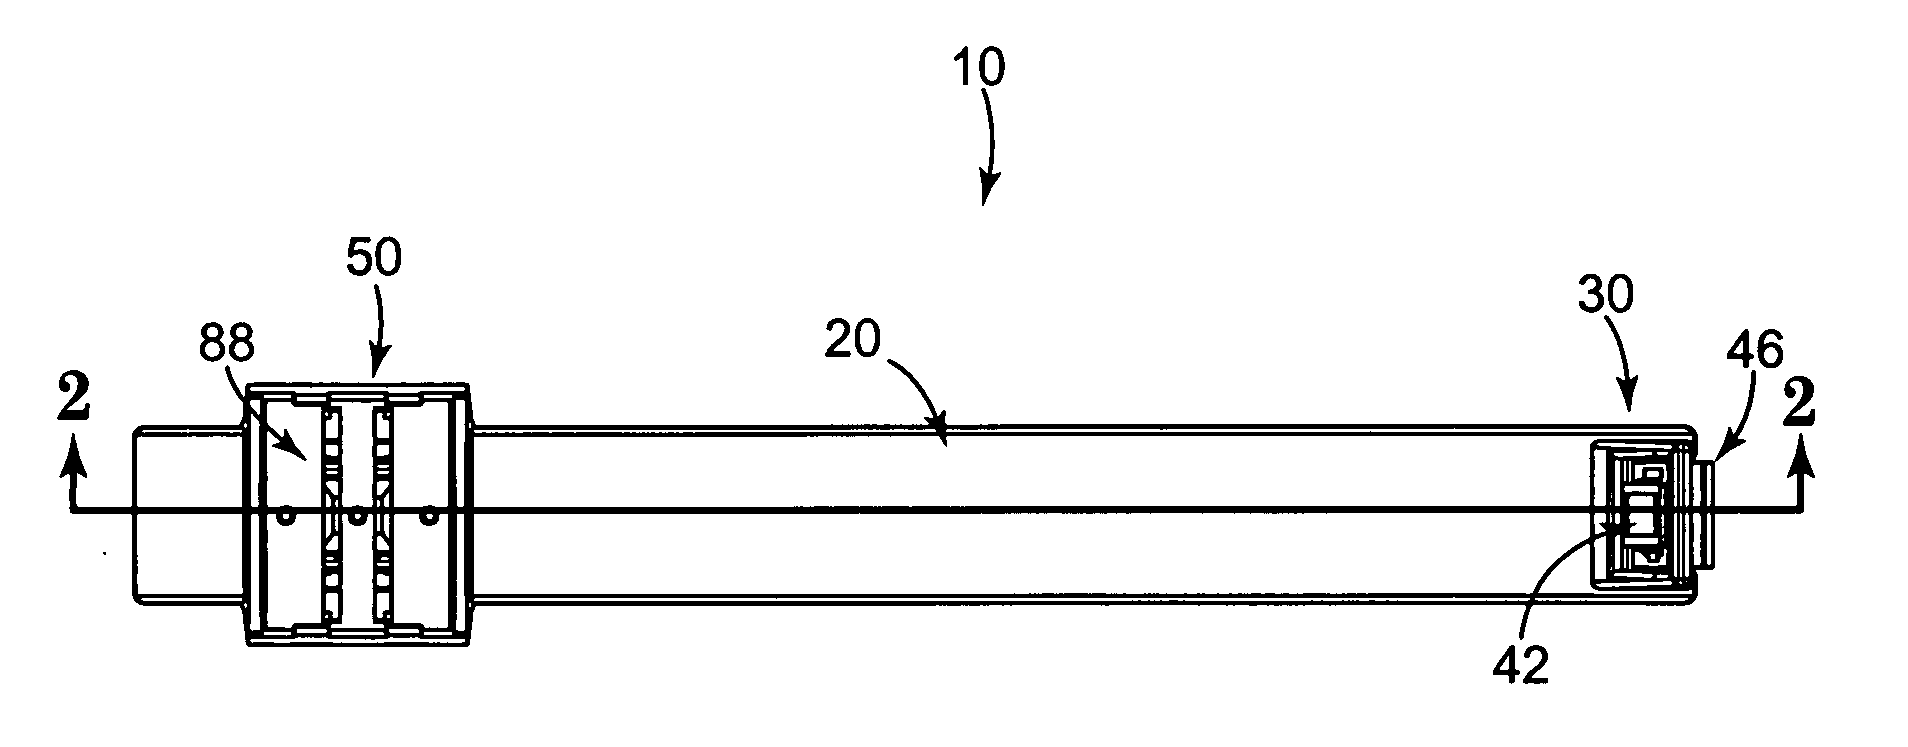 Sun sensor assembly and related method of using